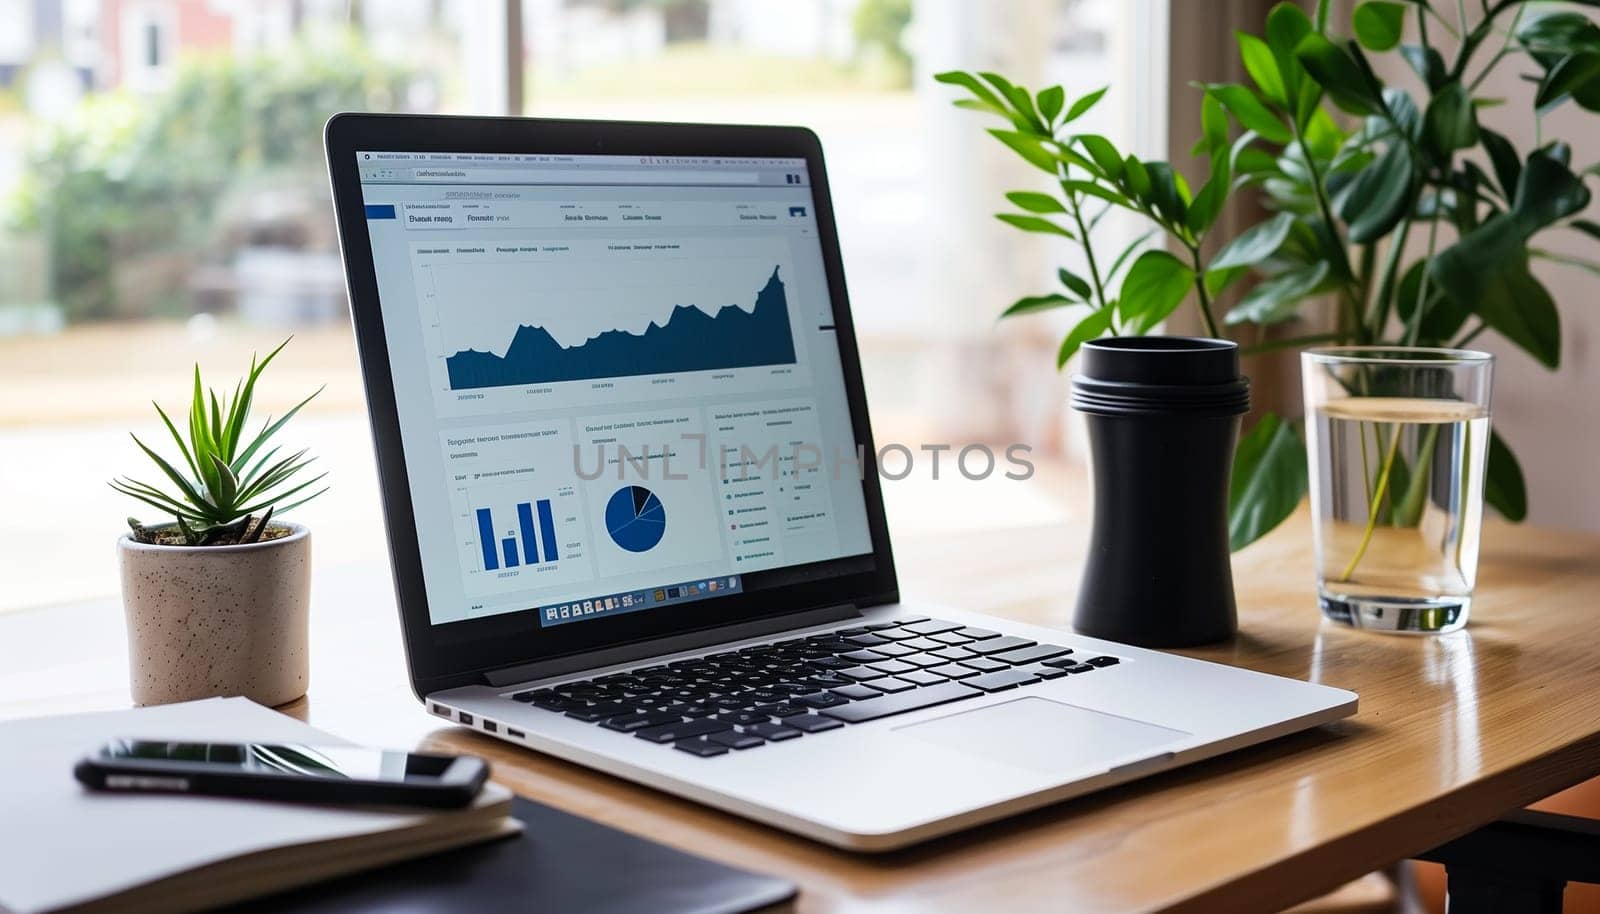 Close up view of laptop screen with financial diagram project statistics, colorful company graphs computer gadget monitor, person look at device analyze corporate finances online, economics concept